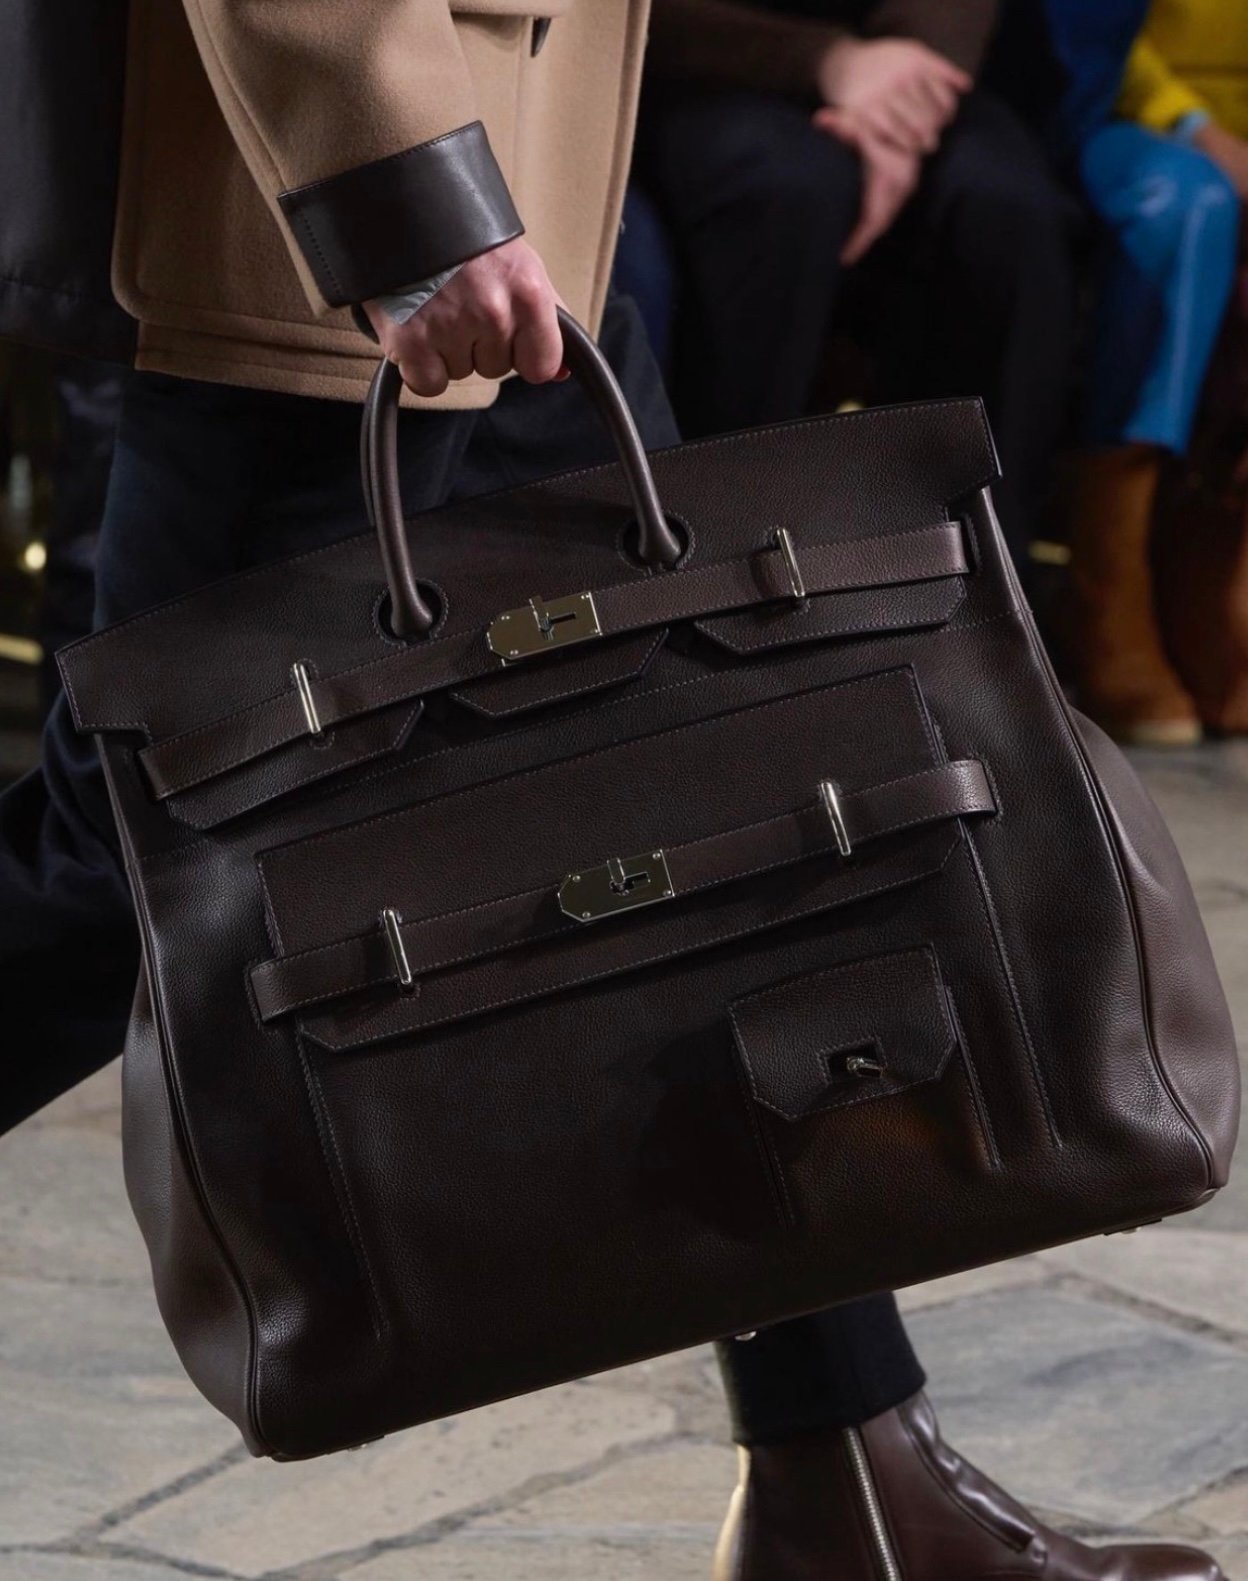 STYLE Edit The most covetable Hermès bags and accessories for men from  the new Haut à Courroies Rock and messenger bag to silk ties sneakers and  phone cases  South China Morning